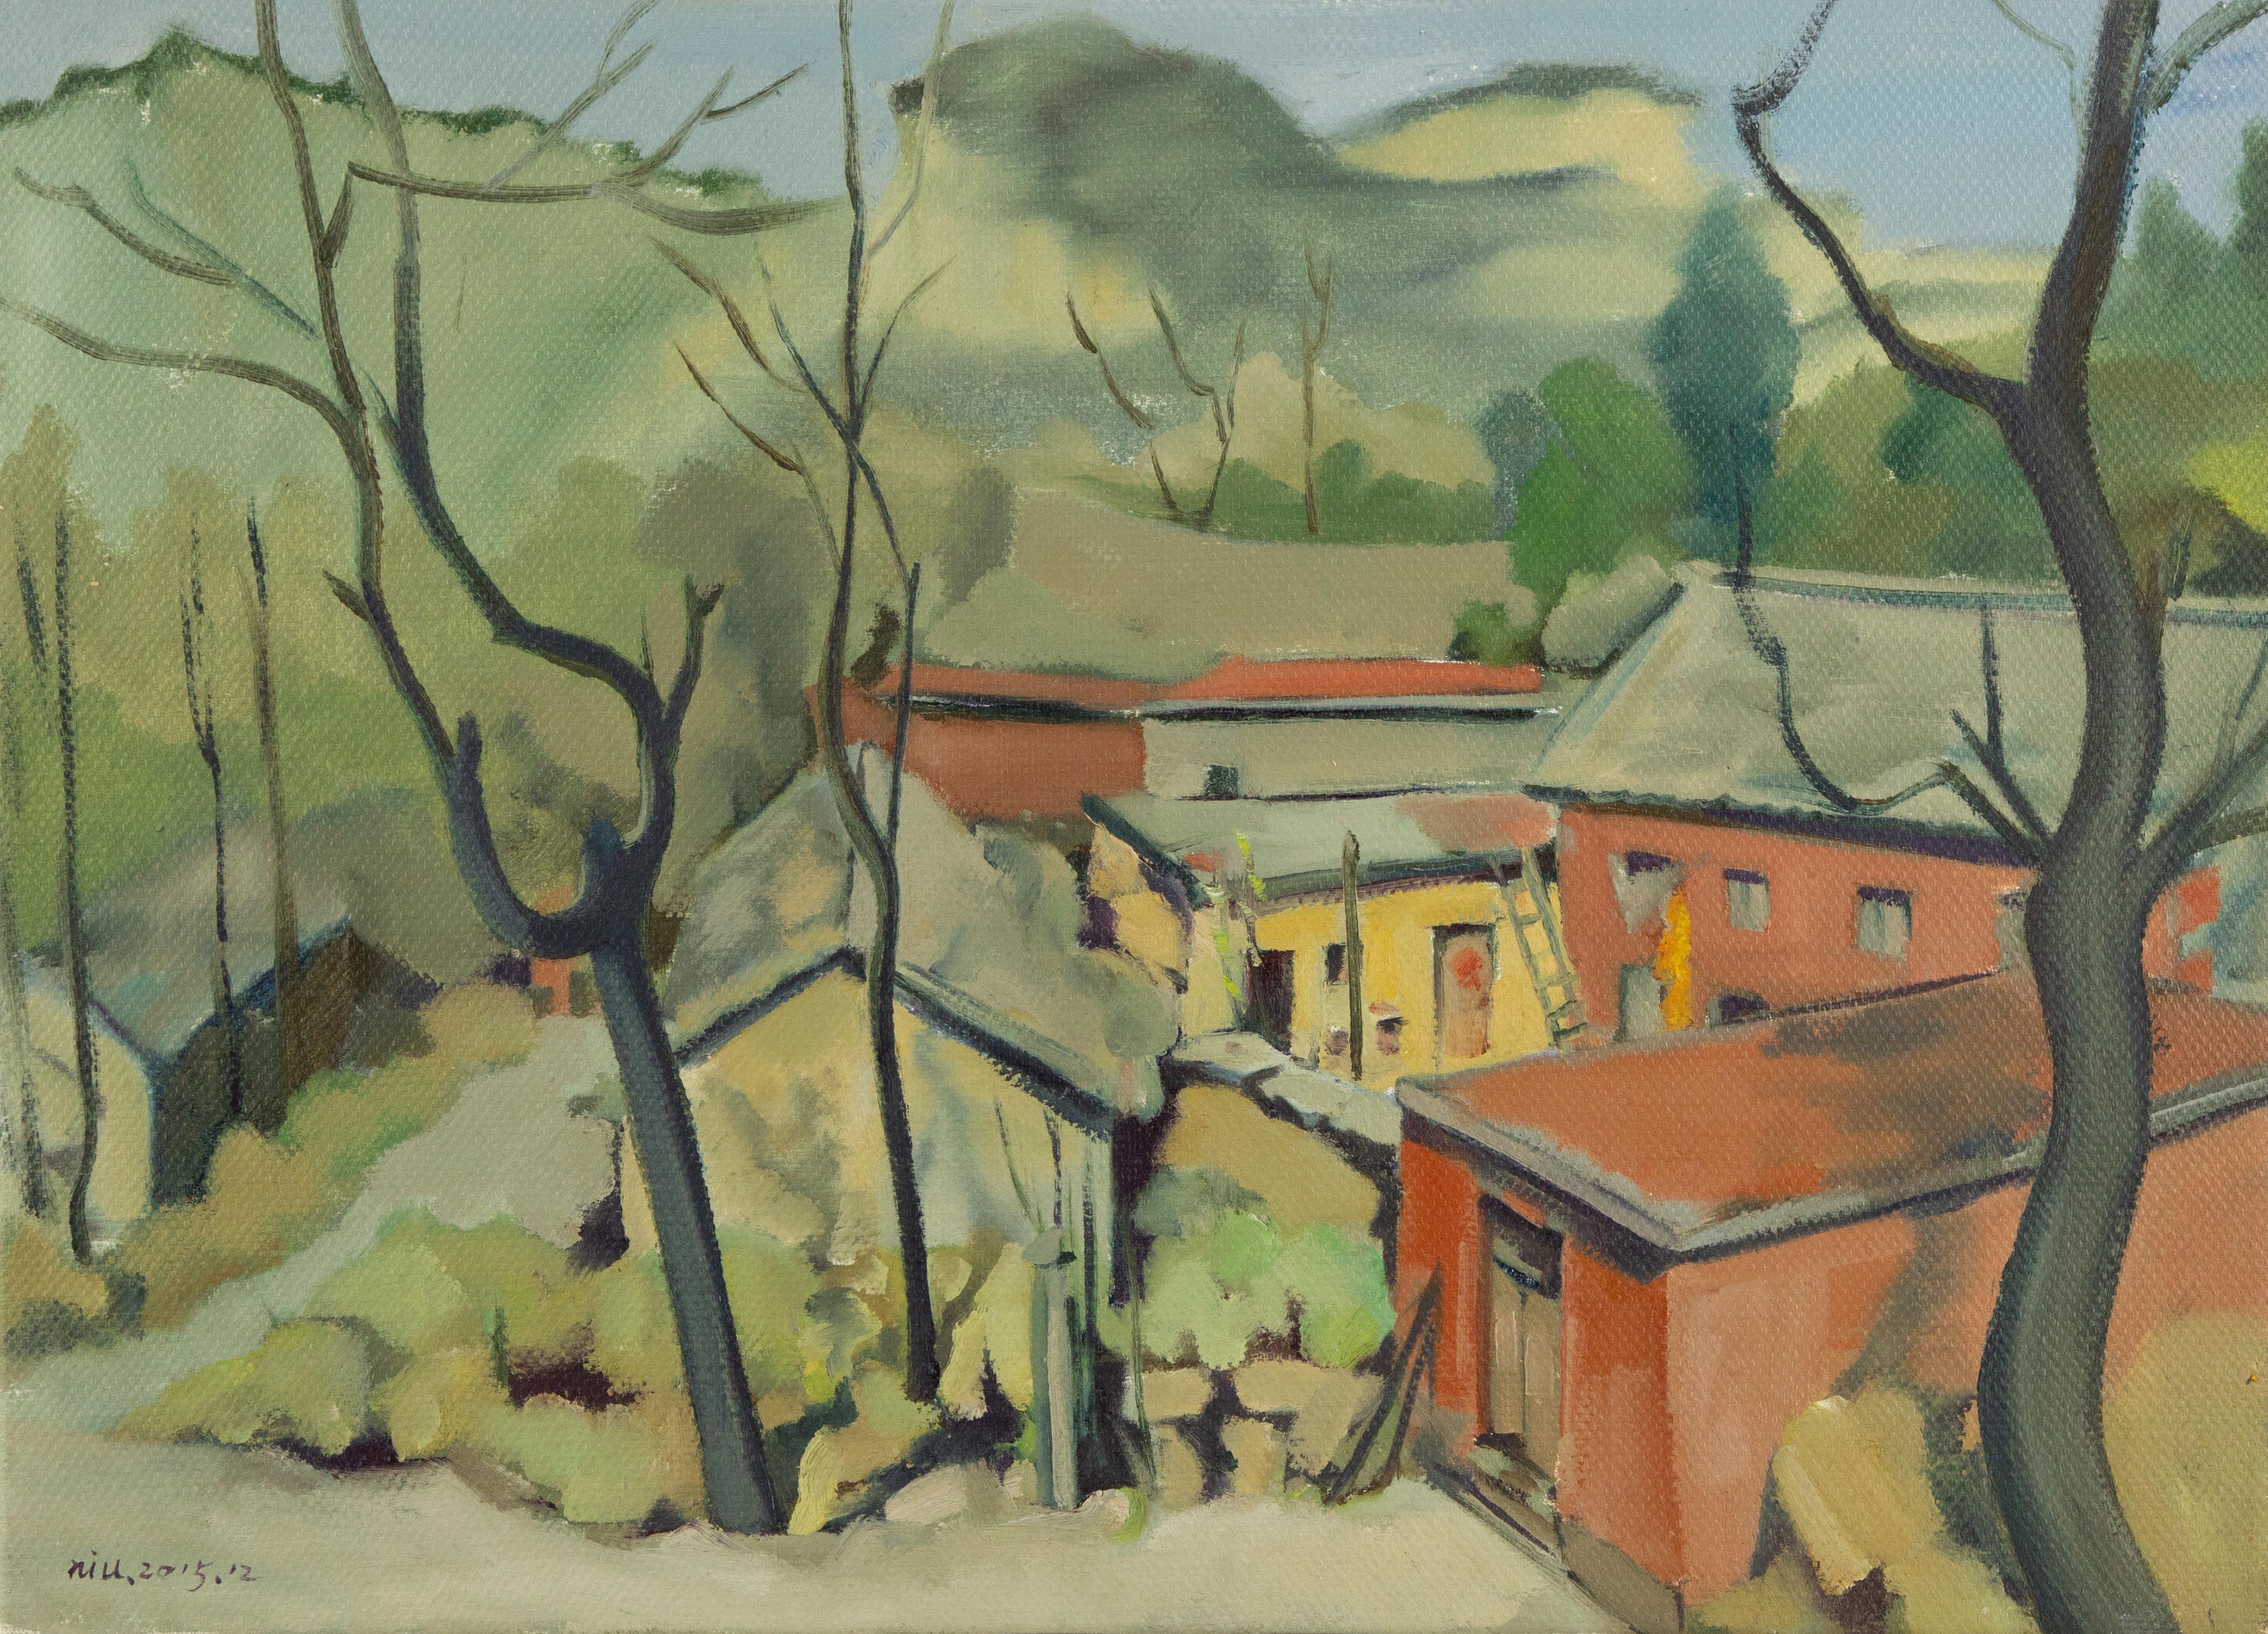  Title: Taihang Mountain Sketching 6
 Medium: Oil on canvas
 Size: 20 x 27 inches
 Frame: Framing options available!
 
 Year: 2015
 Artist: Xiang Niu
 Signature: Signed
 Signature Location: Lower left
 Provenance: Direct from the artist.